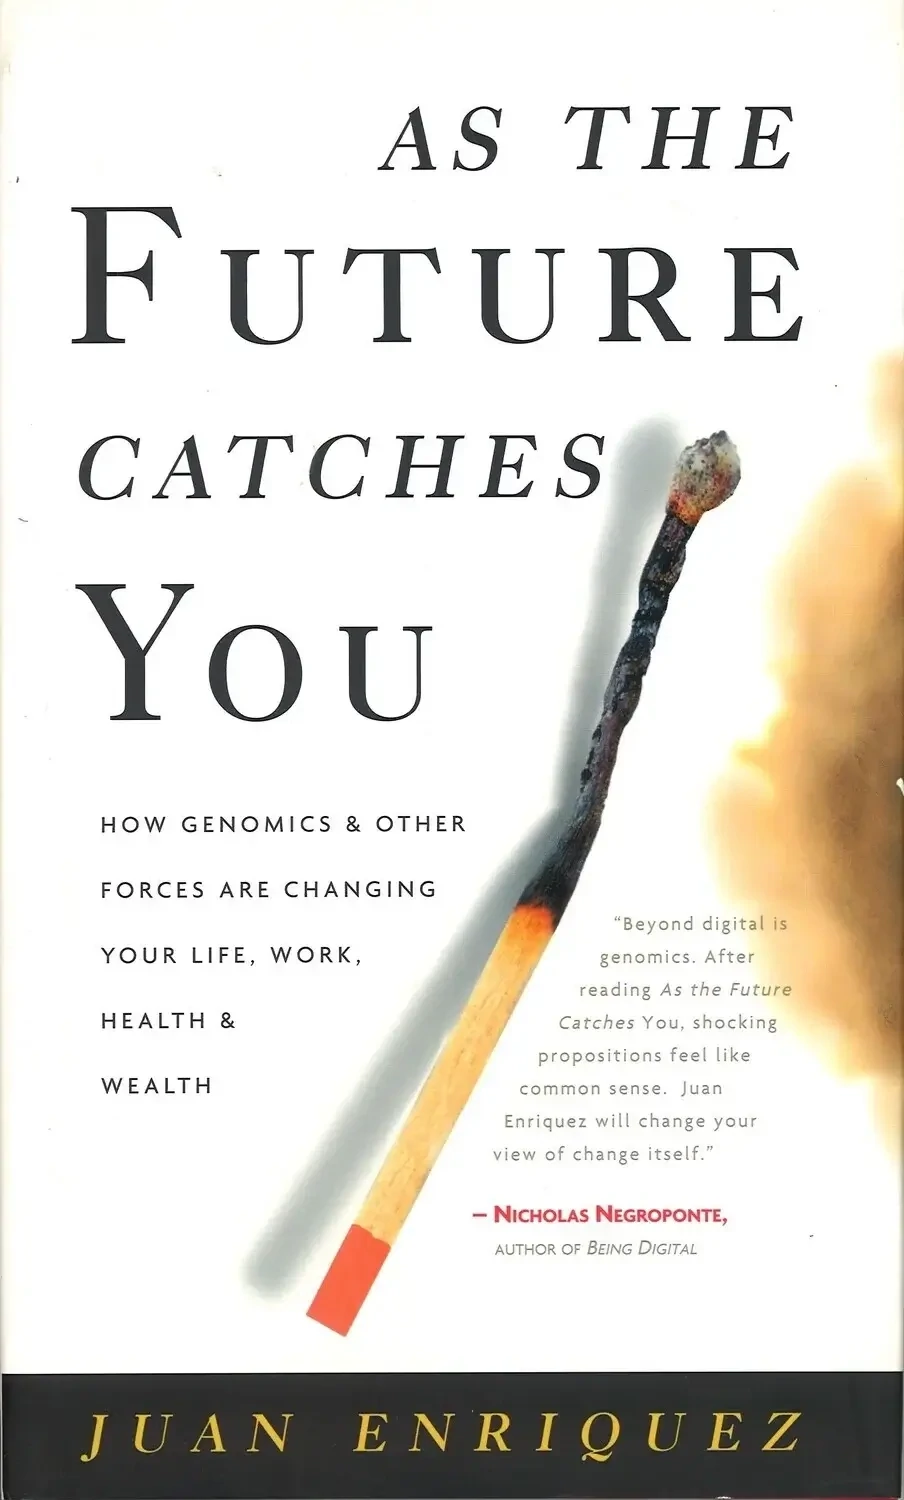 As the Future Catches You with CD by Juan Enriquez